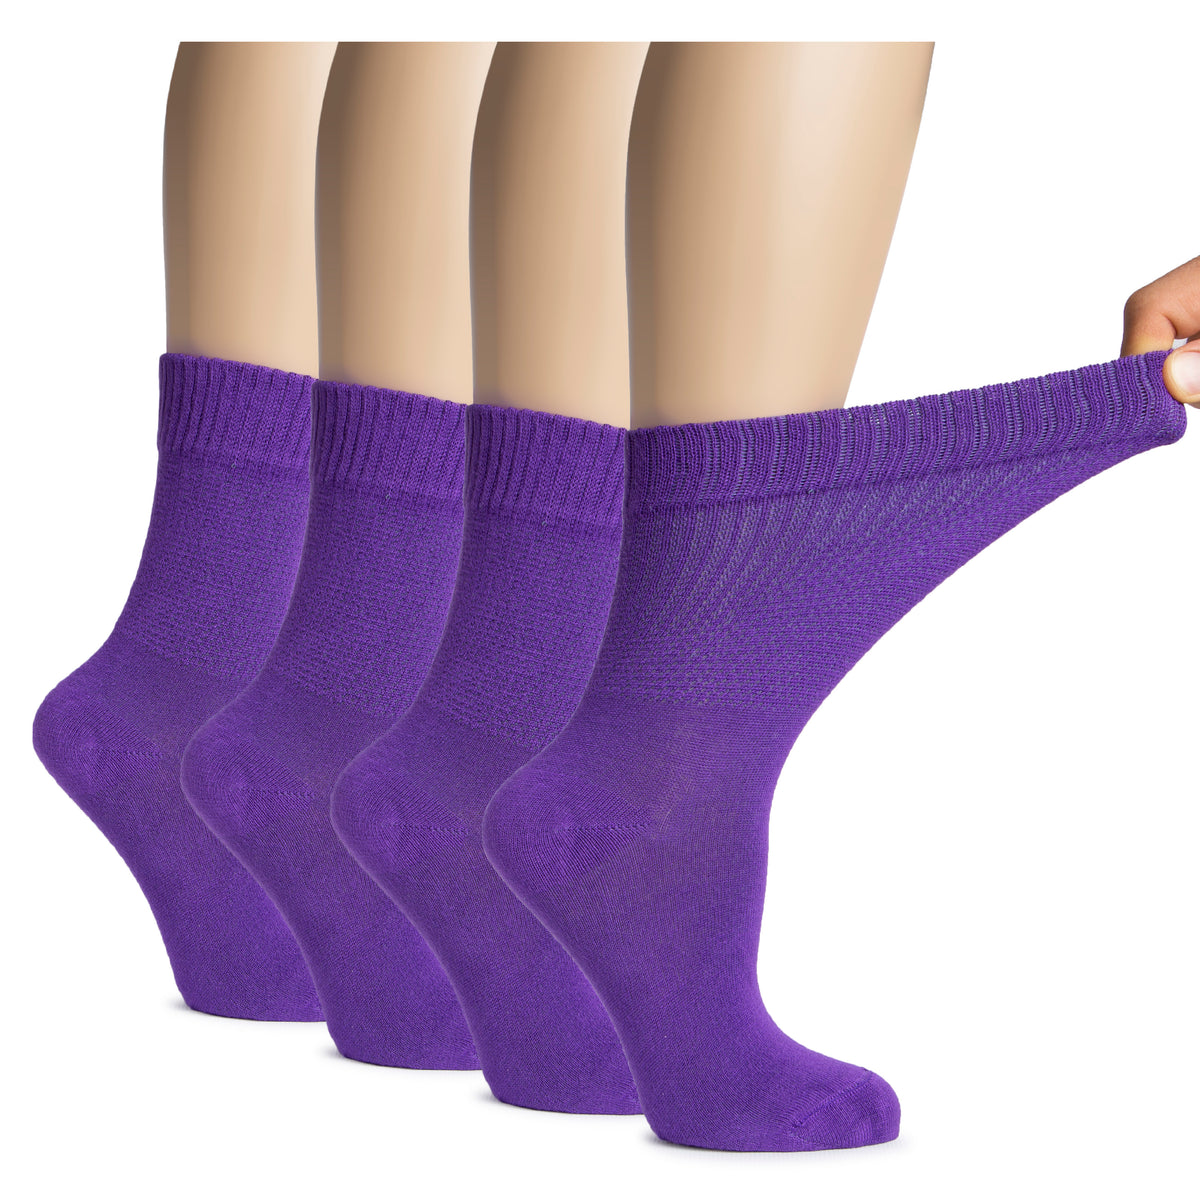 These Women's Bamboo Diabetic Crew Socks in purple are held by a woman's hand, providing a comfortable and supportive fit.